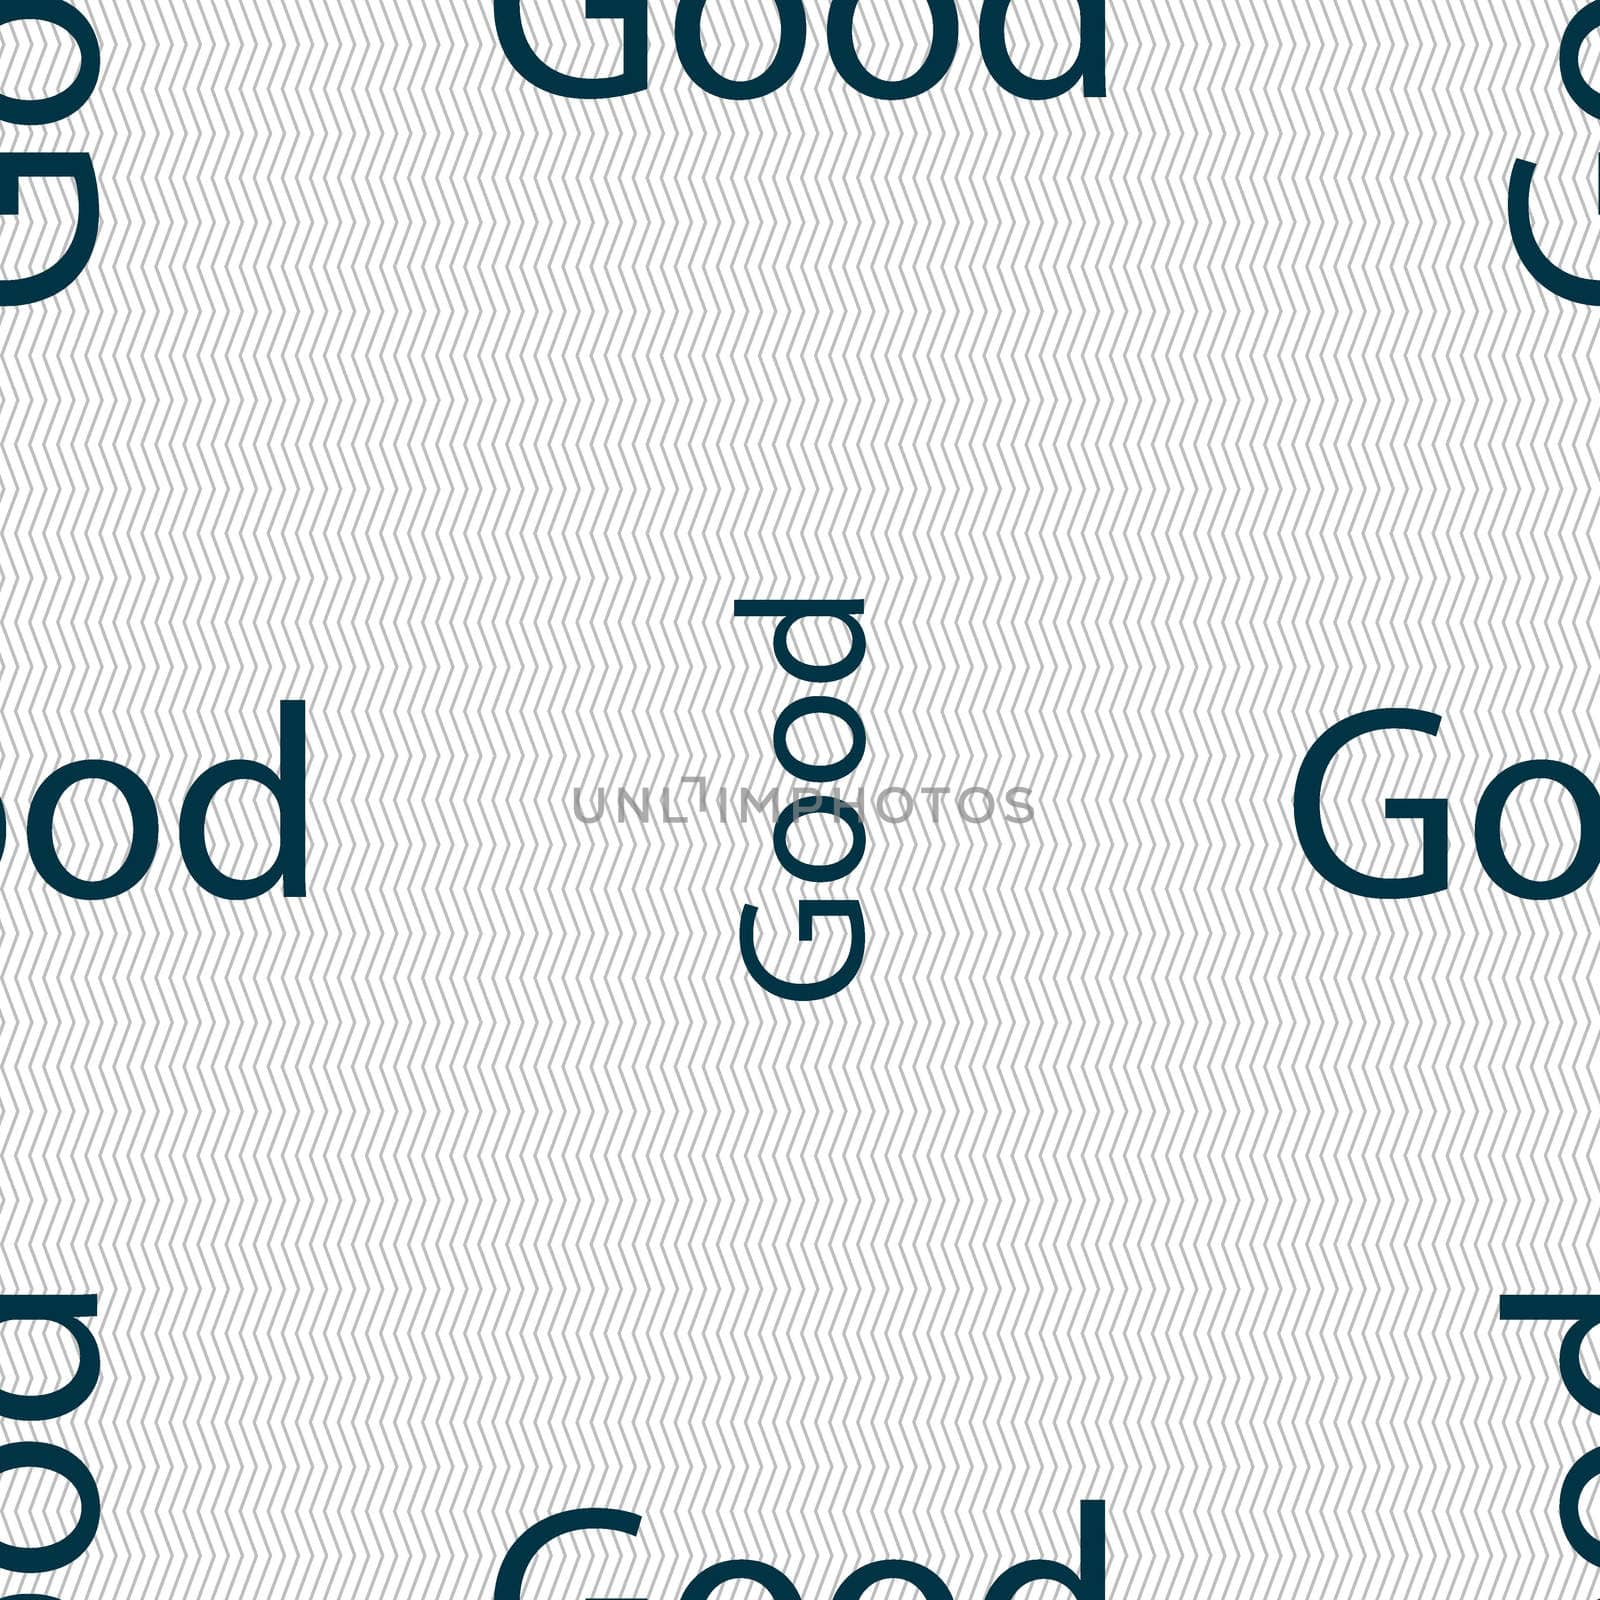 Good sign icon. Seamless abstract background with geometric shapes. illustration